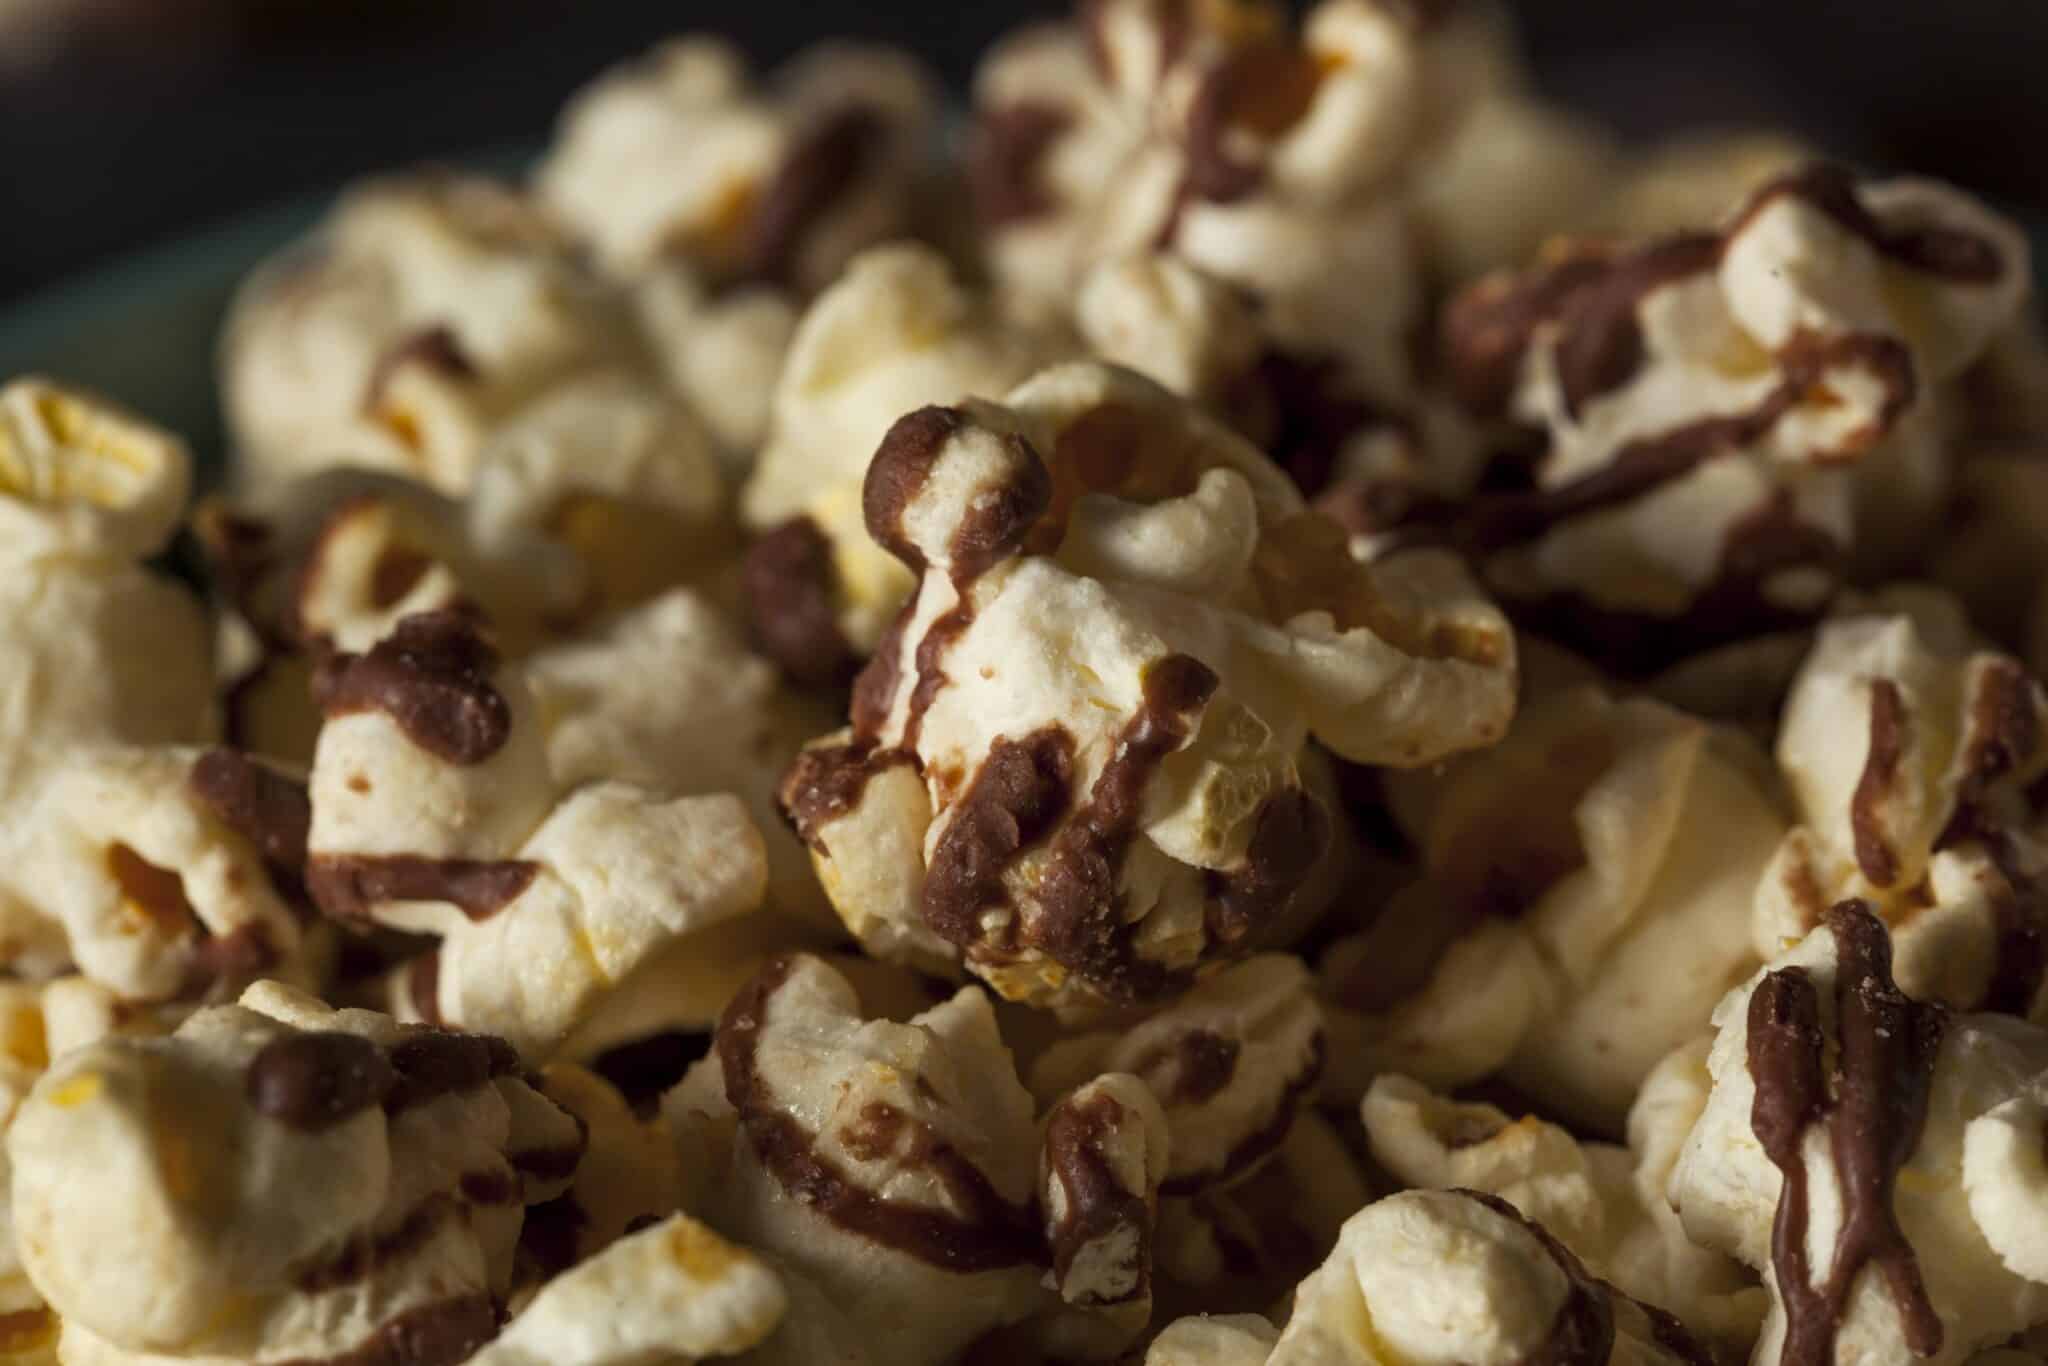 Homemade Chocolate Drizzled Caramel Popcorn Ready to Eat